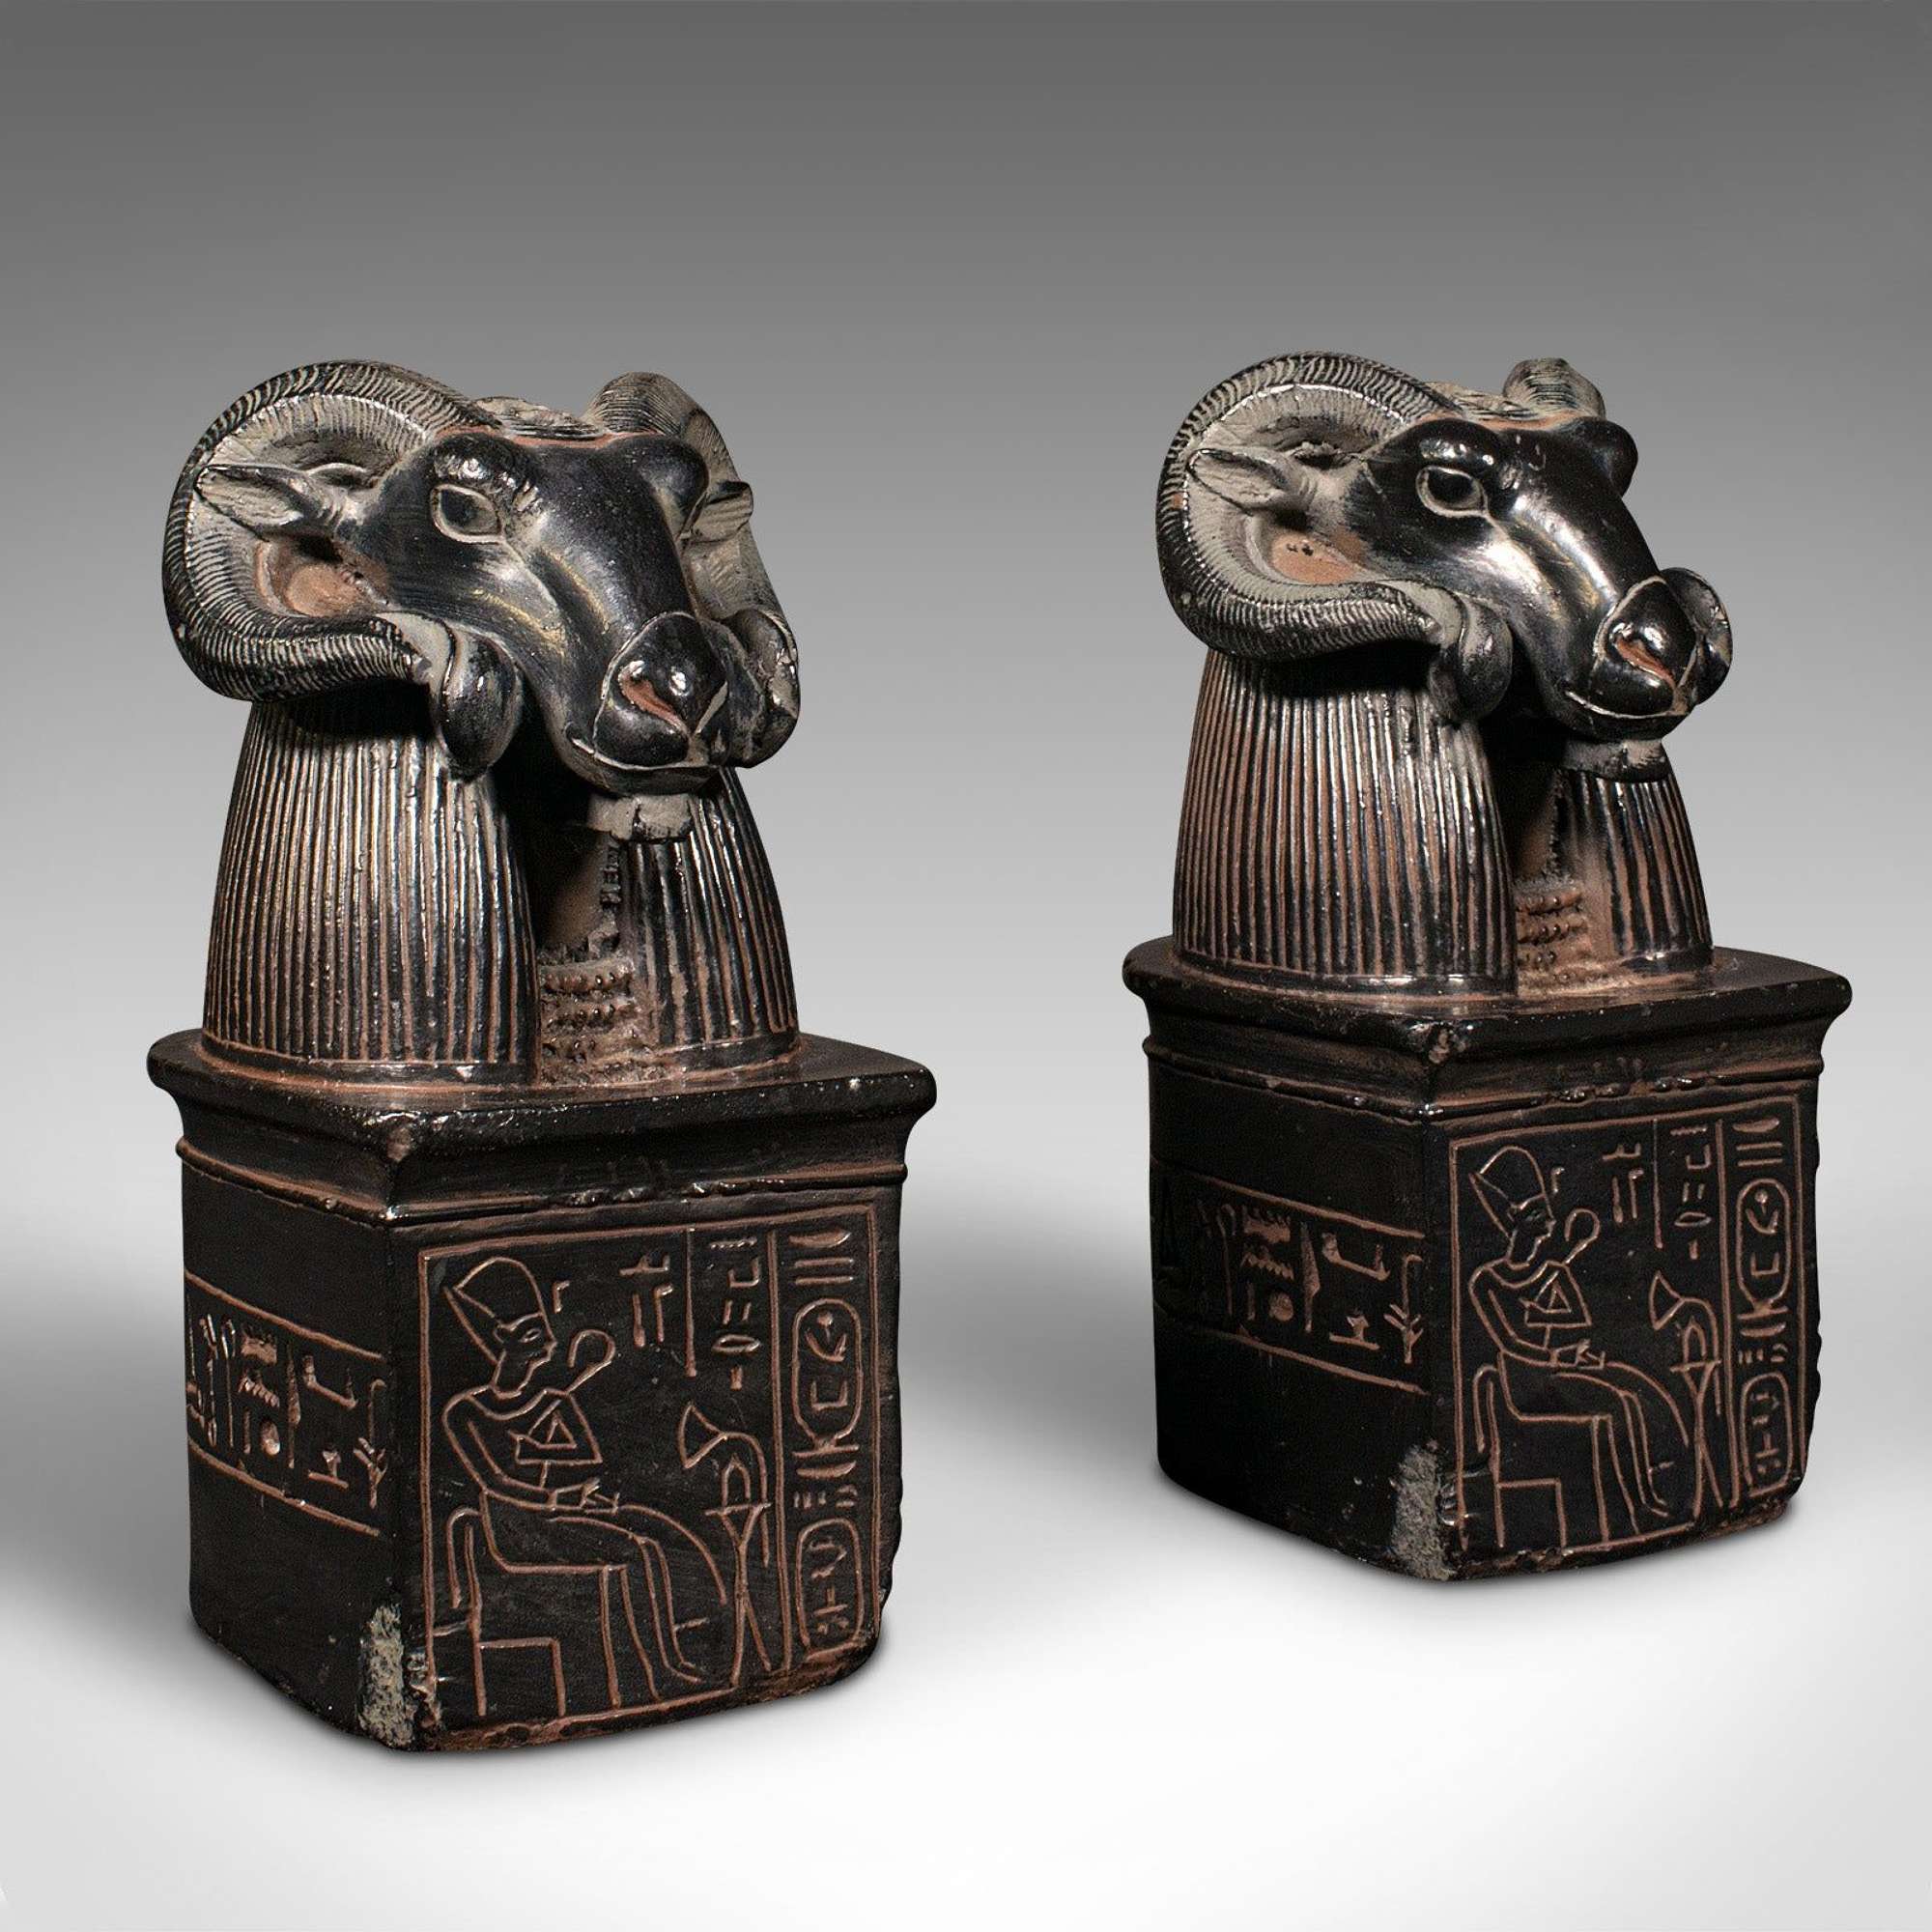 Pair Of Vintage Amun Statuary Bookends, Egyptian, Decorative Book Rest, Historic